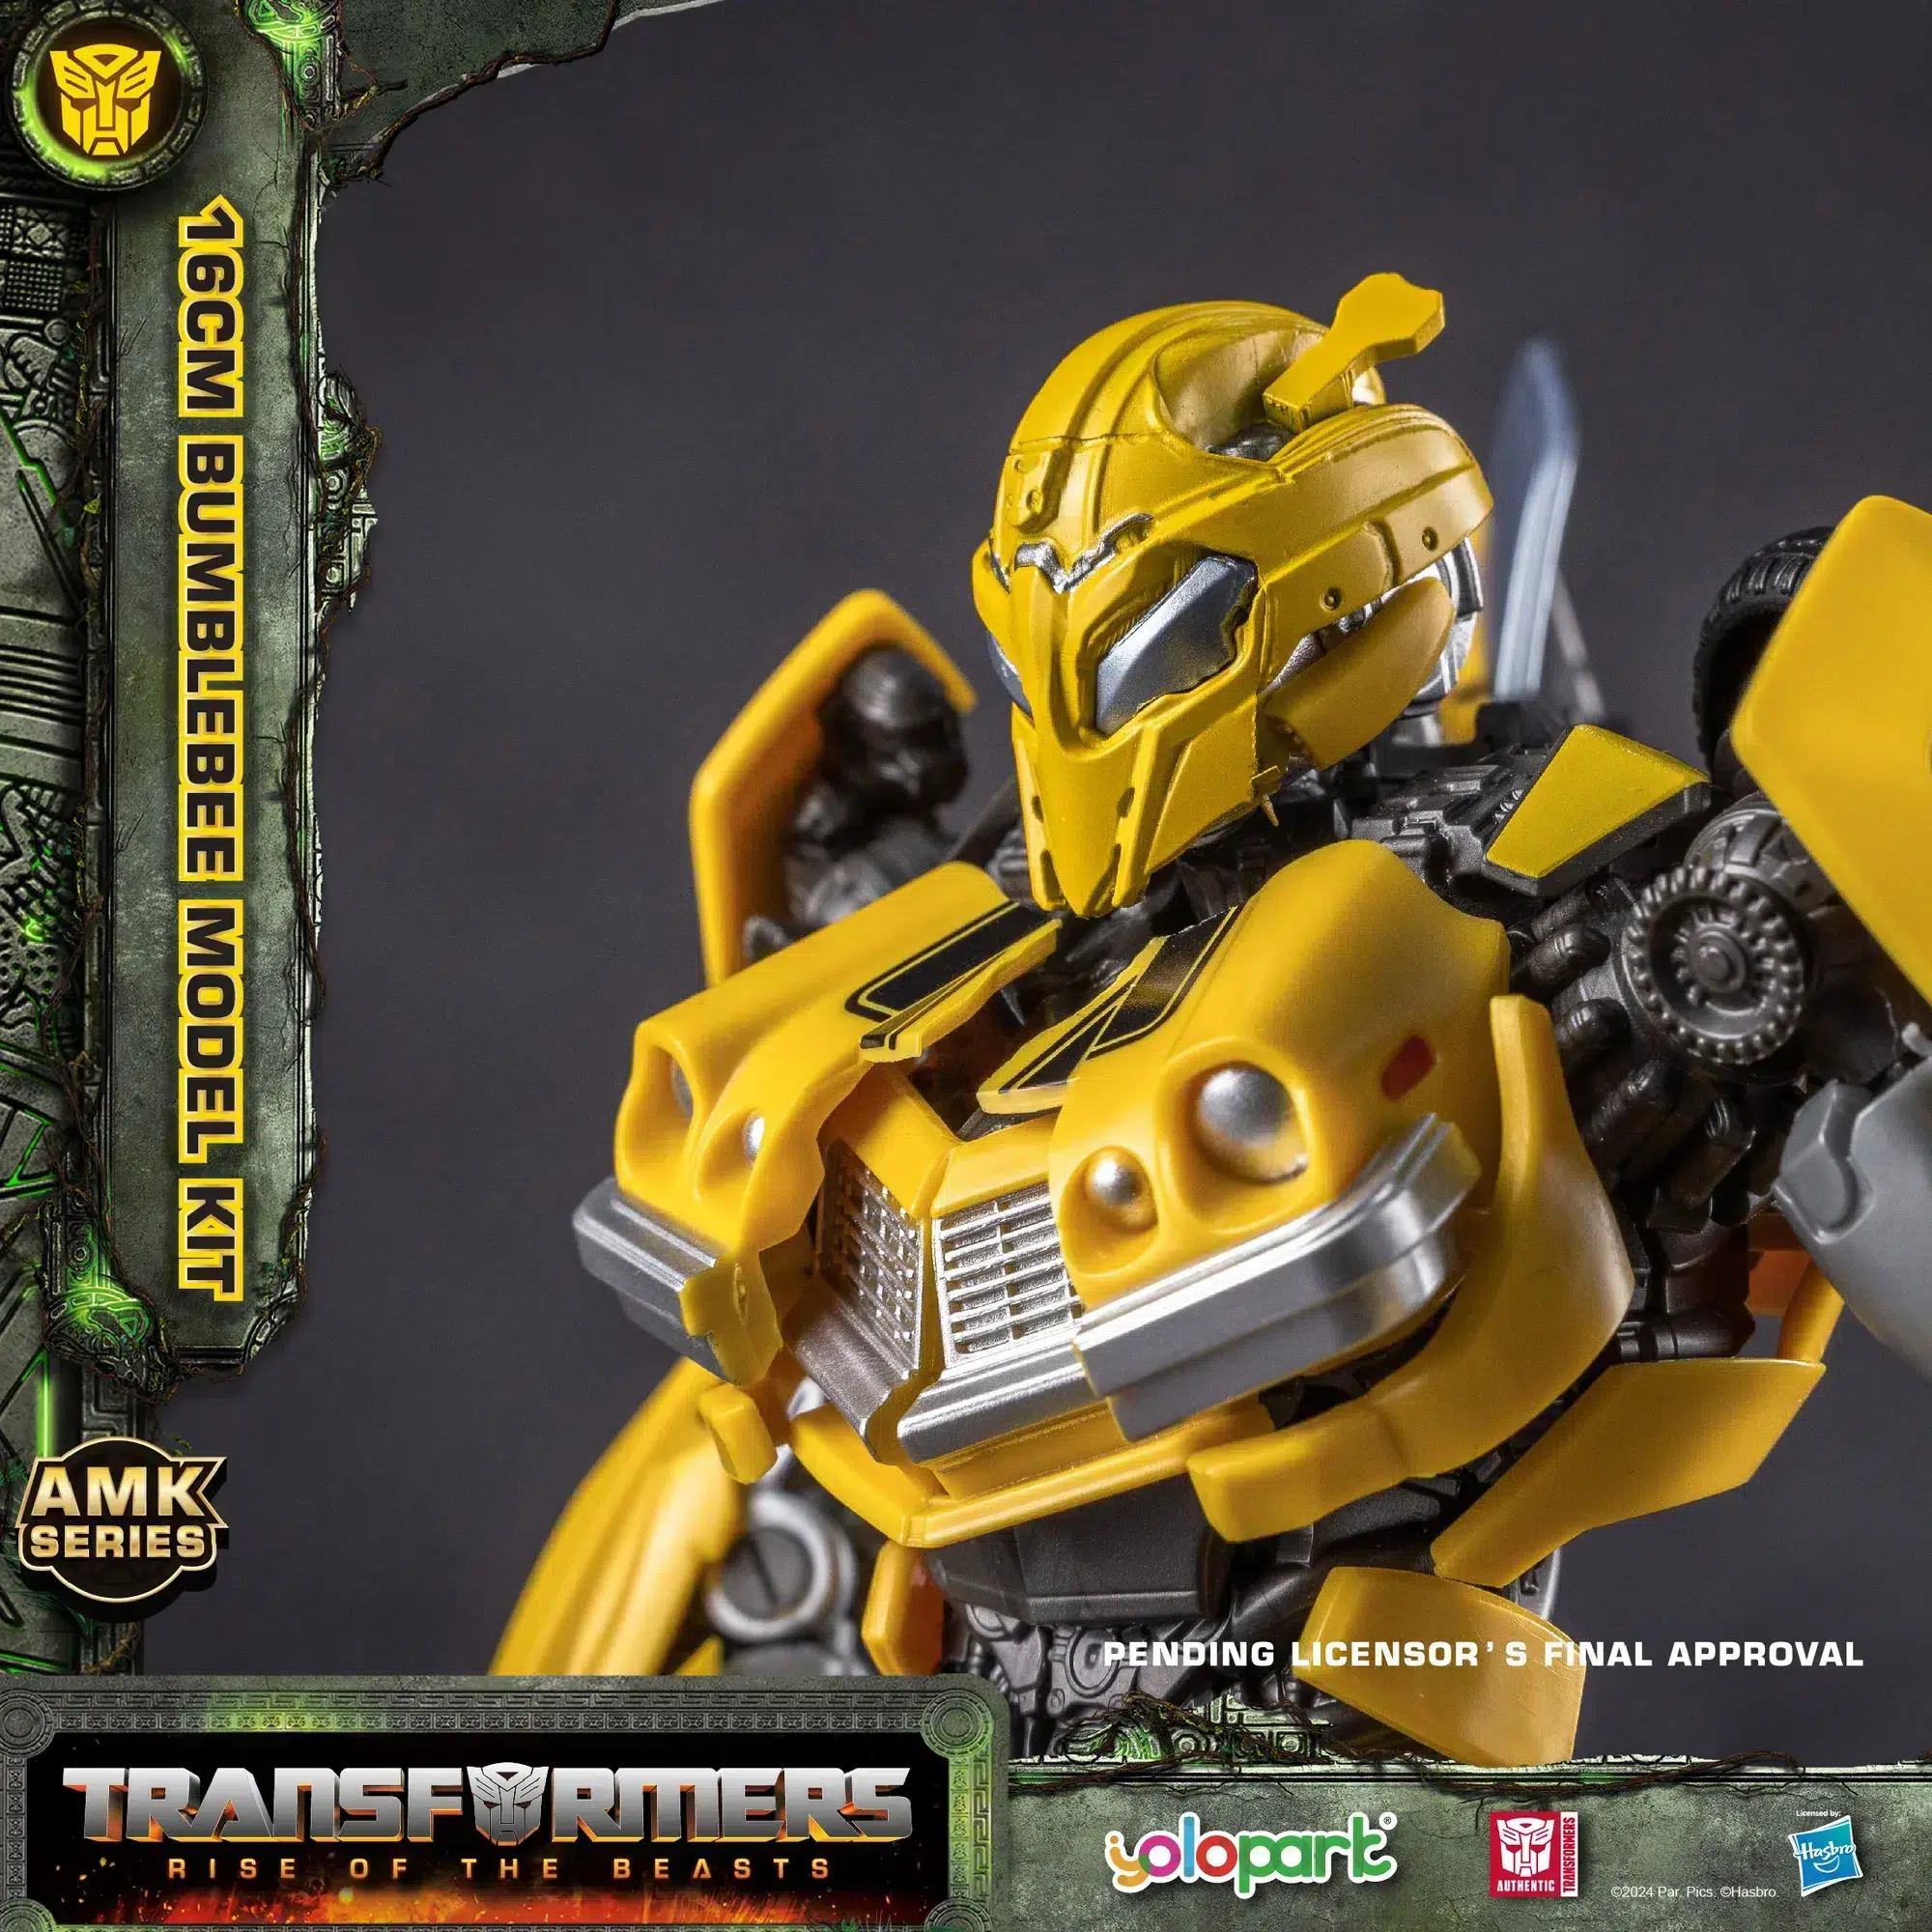 Yolopark Amk Serie Transformers Rise Of The Beasts Cheetor Kit Modello 5